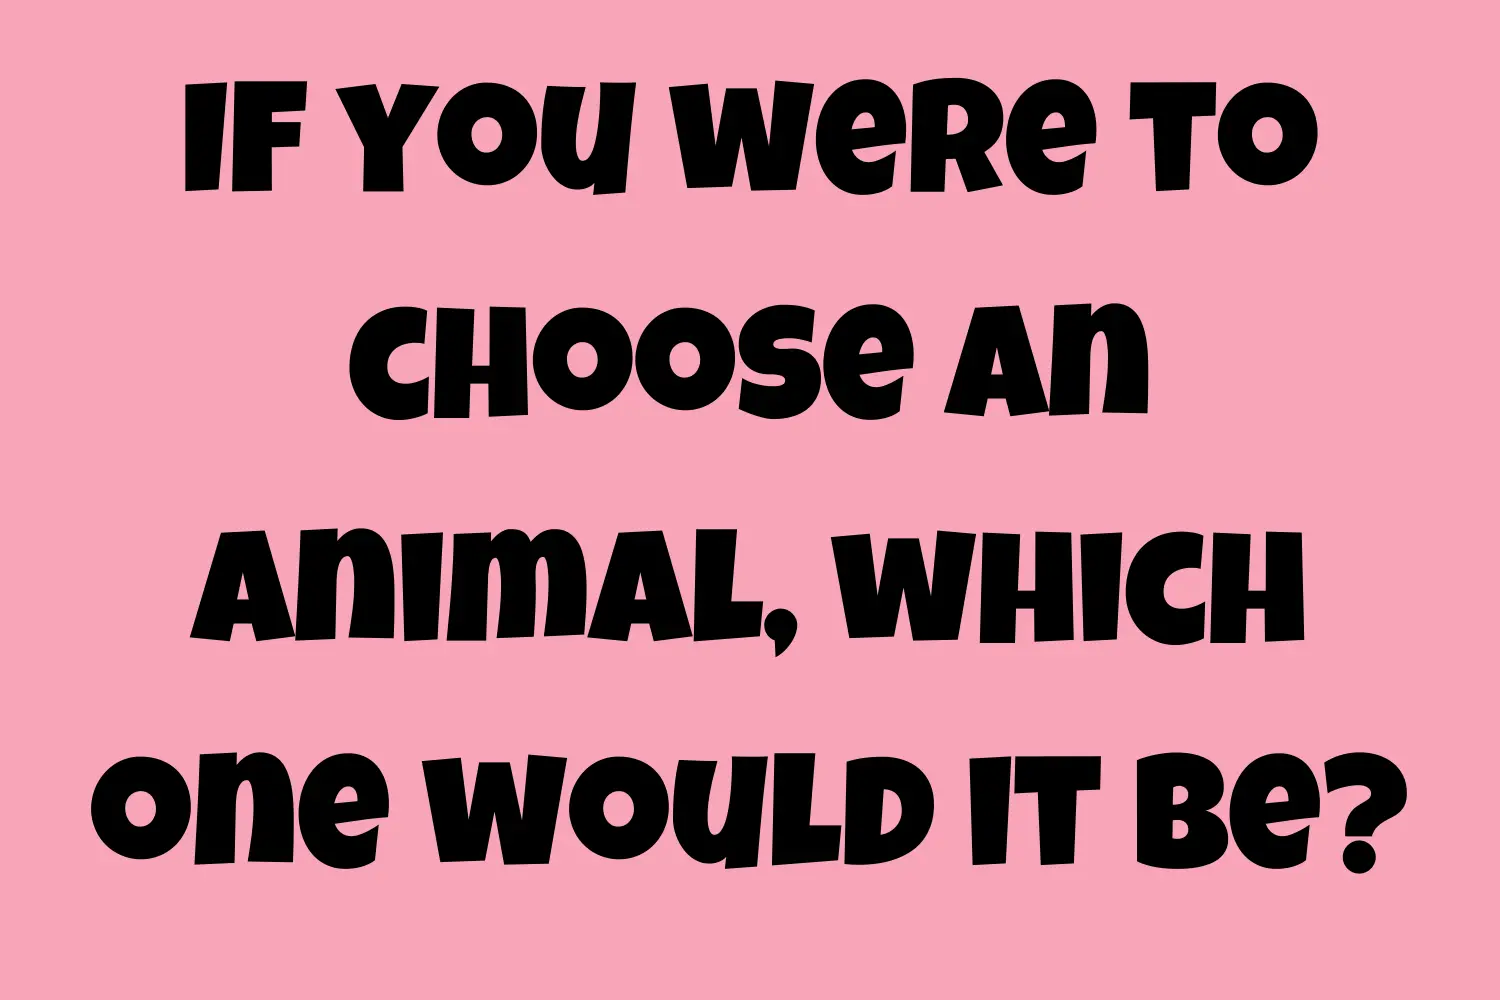 If you were to choose an animal, which one would it be?